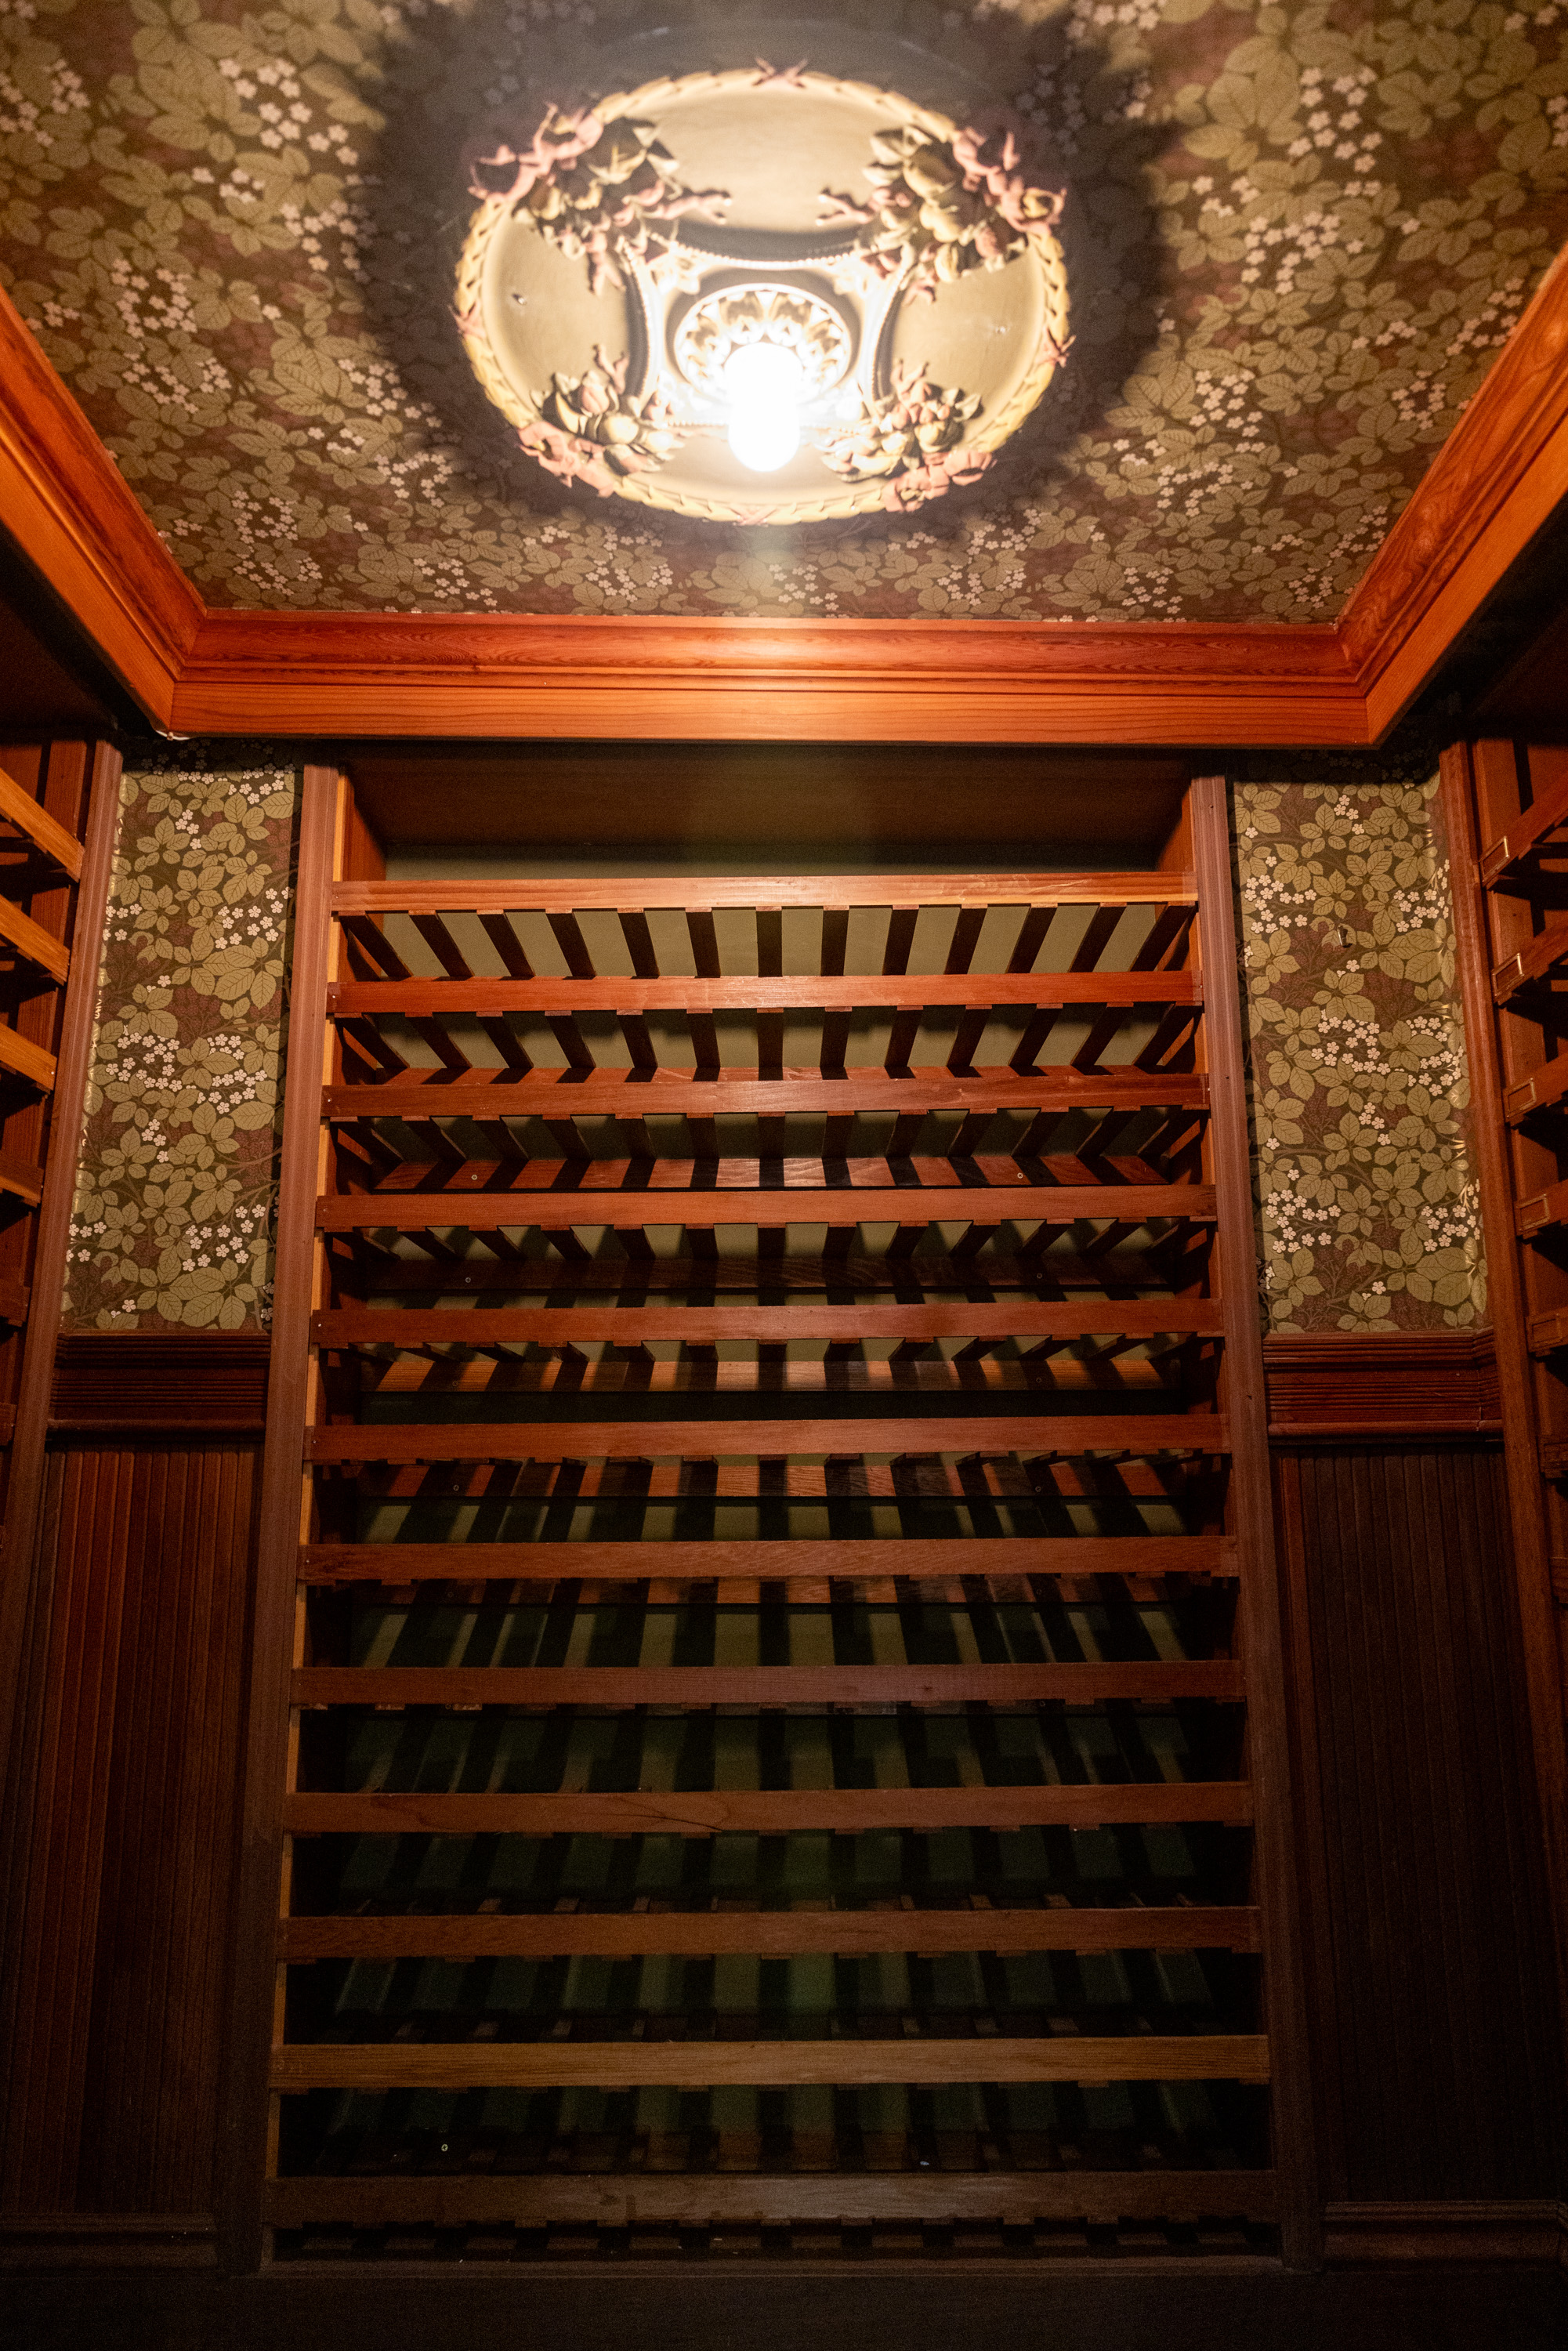 The image shows ornate ceiling lights and patterned wallpaper above empty wooden wine racks in a dimly lit room.